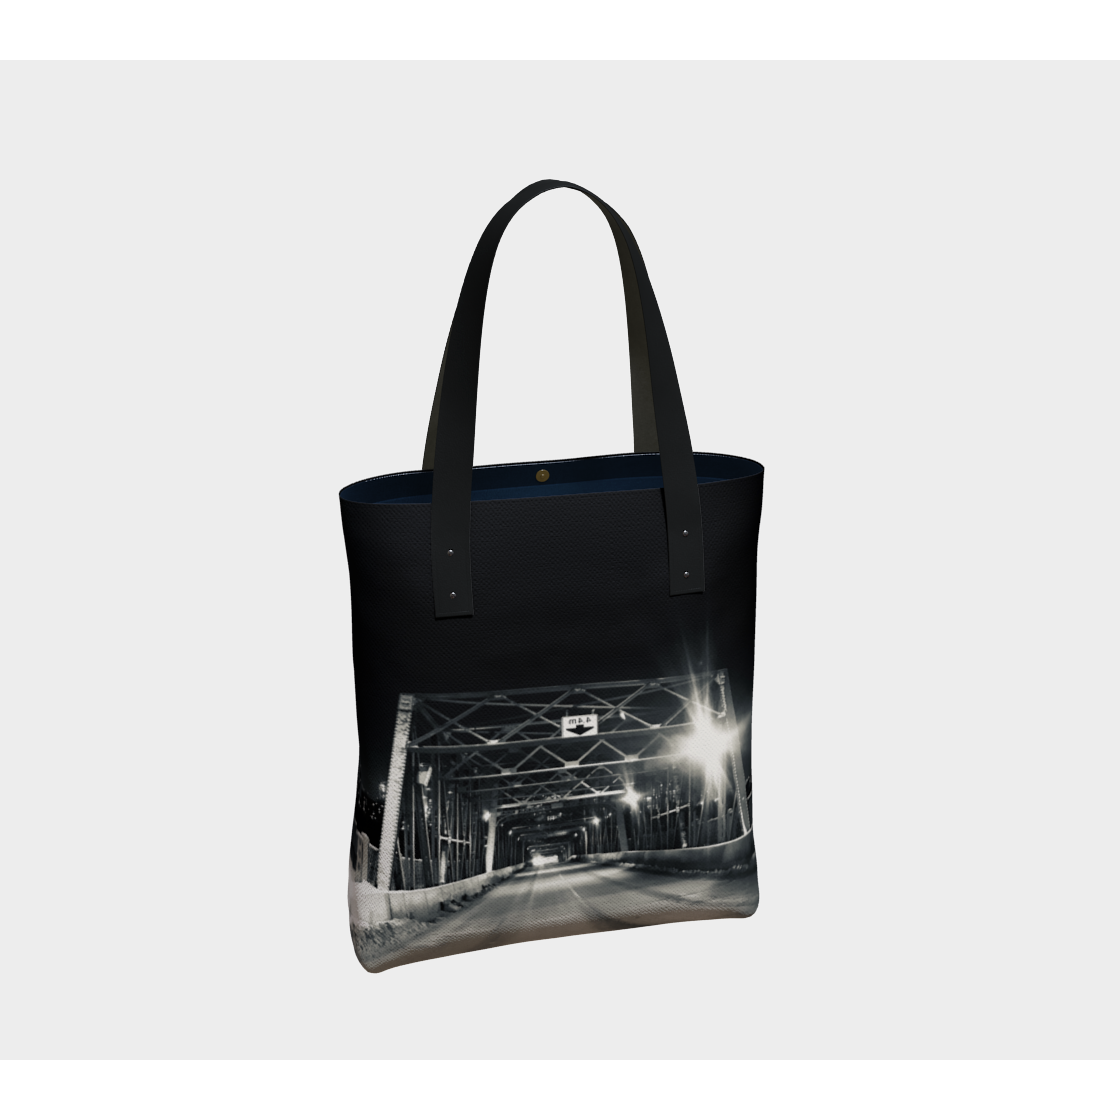 Tote Bag for Women with: Bridge at Night Design, Back